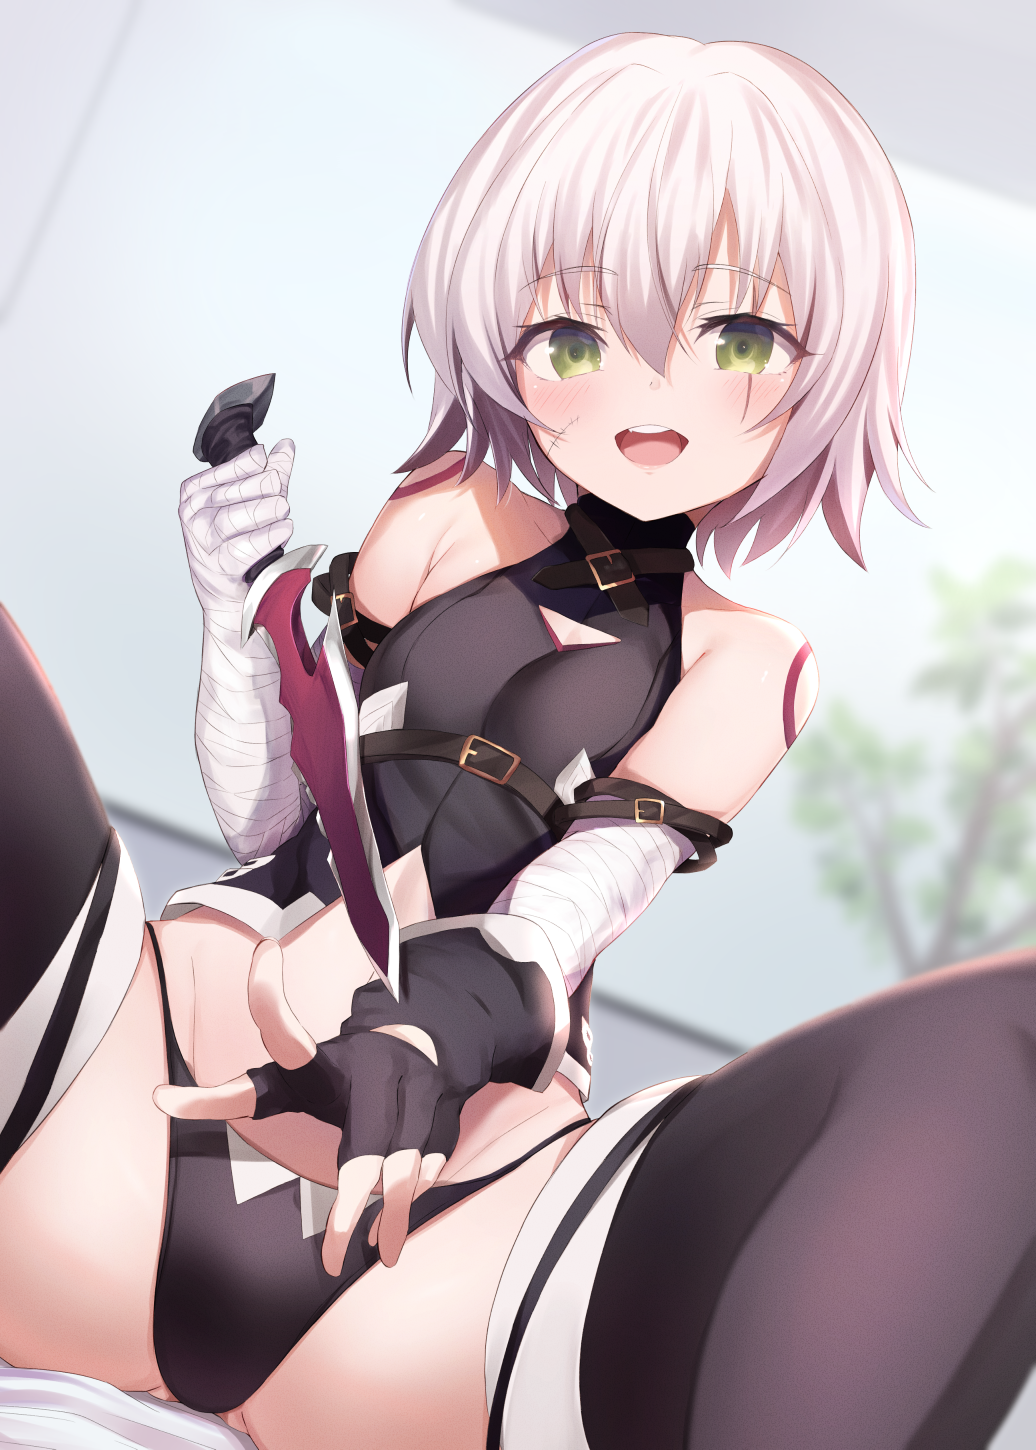 Anime 1036x1450 anime anime girls digital art artwork 2D portrait display Fate series Fate/Grand Order Fate/Apocrypha  Jack the Ripper (Fate/Apocrypha) Maosame spread legs panties knife